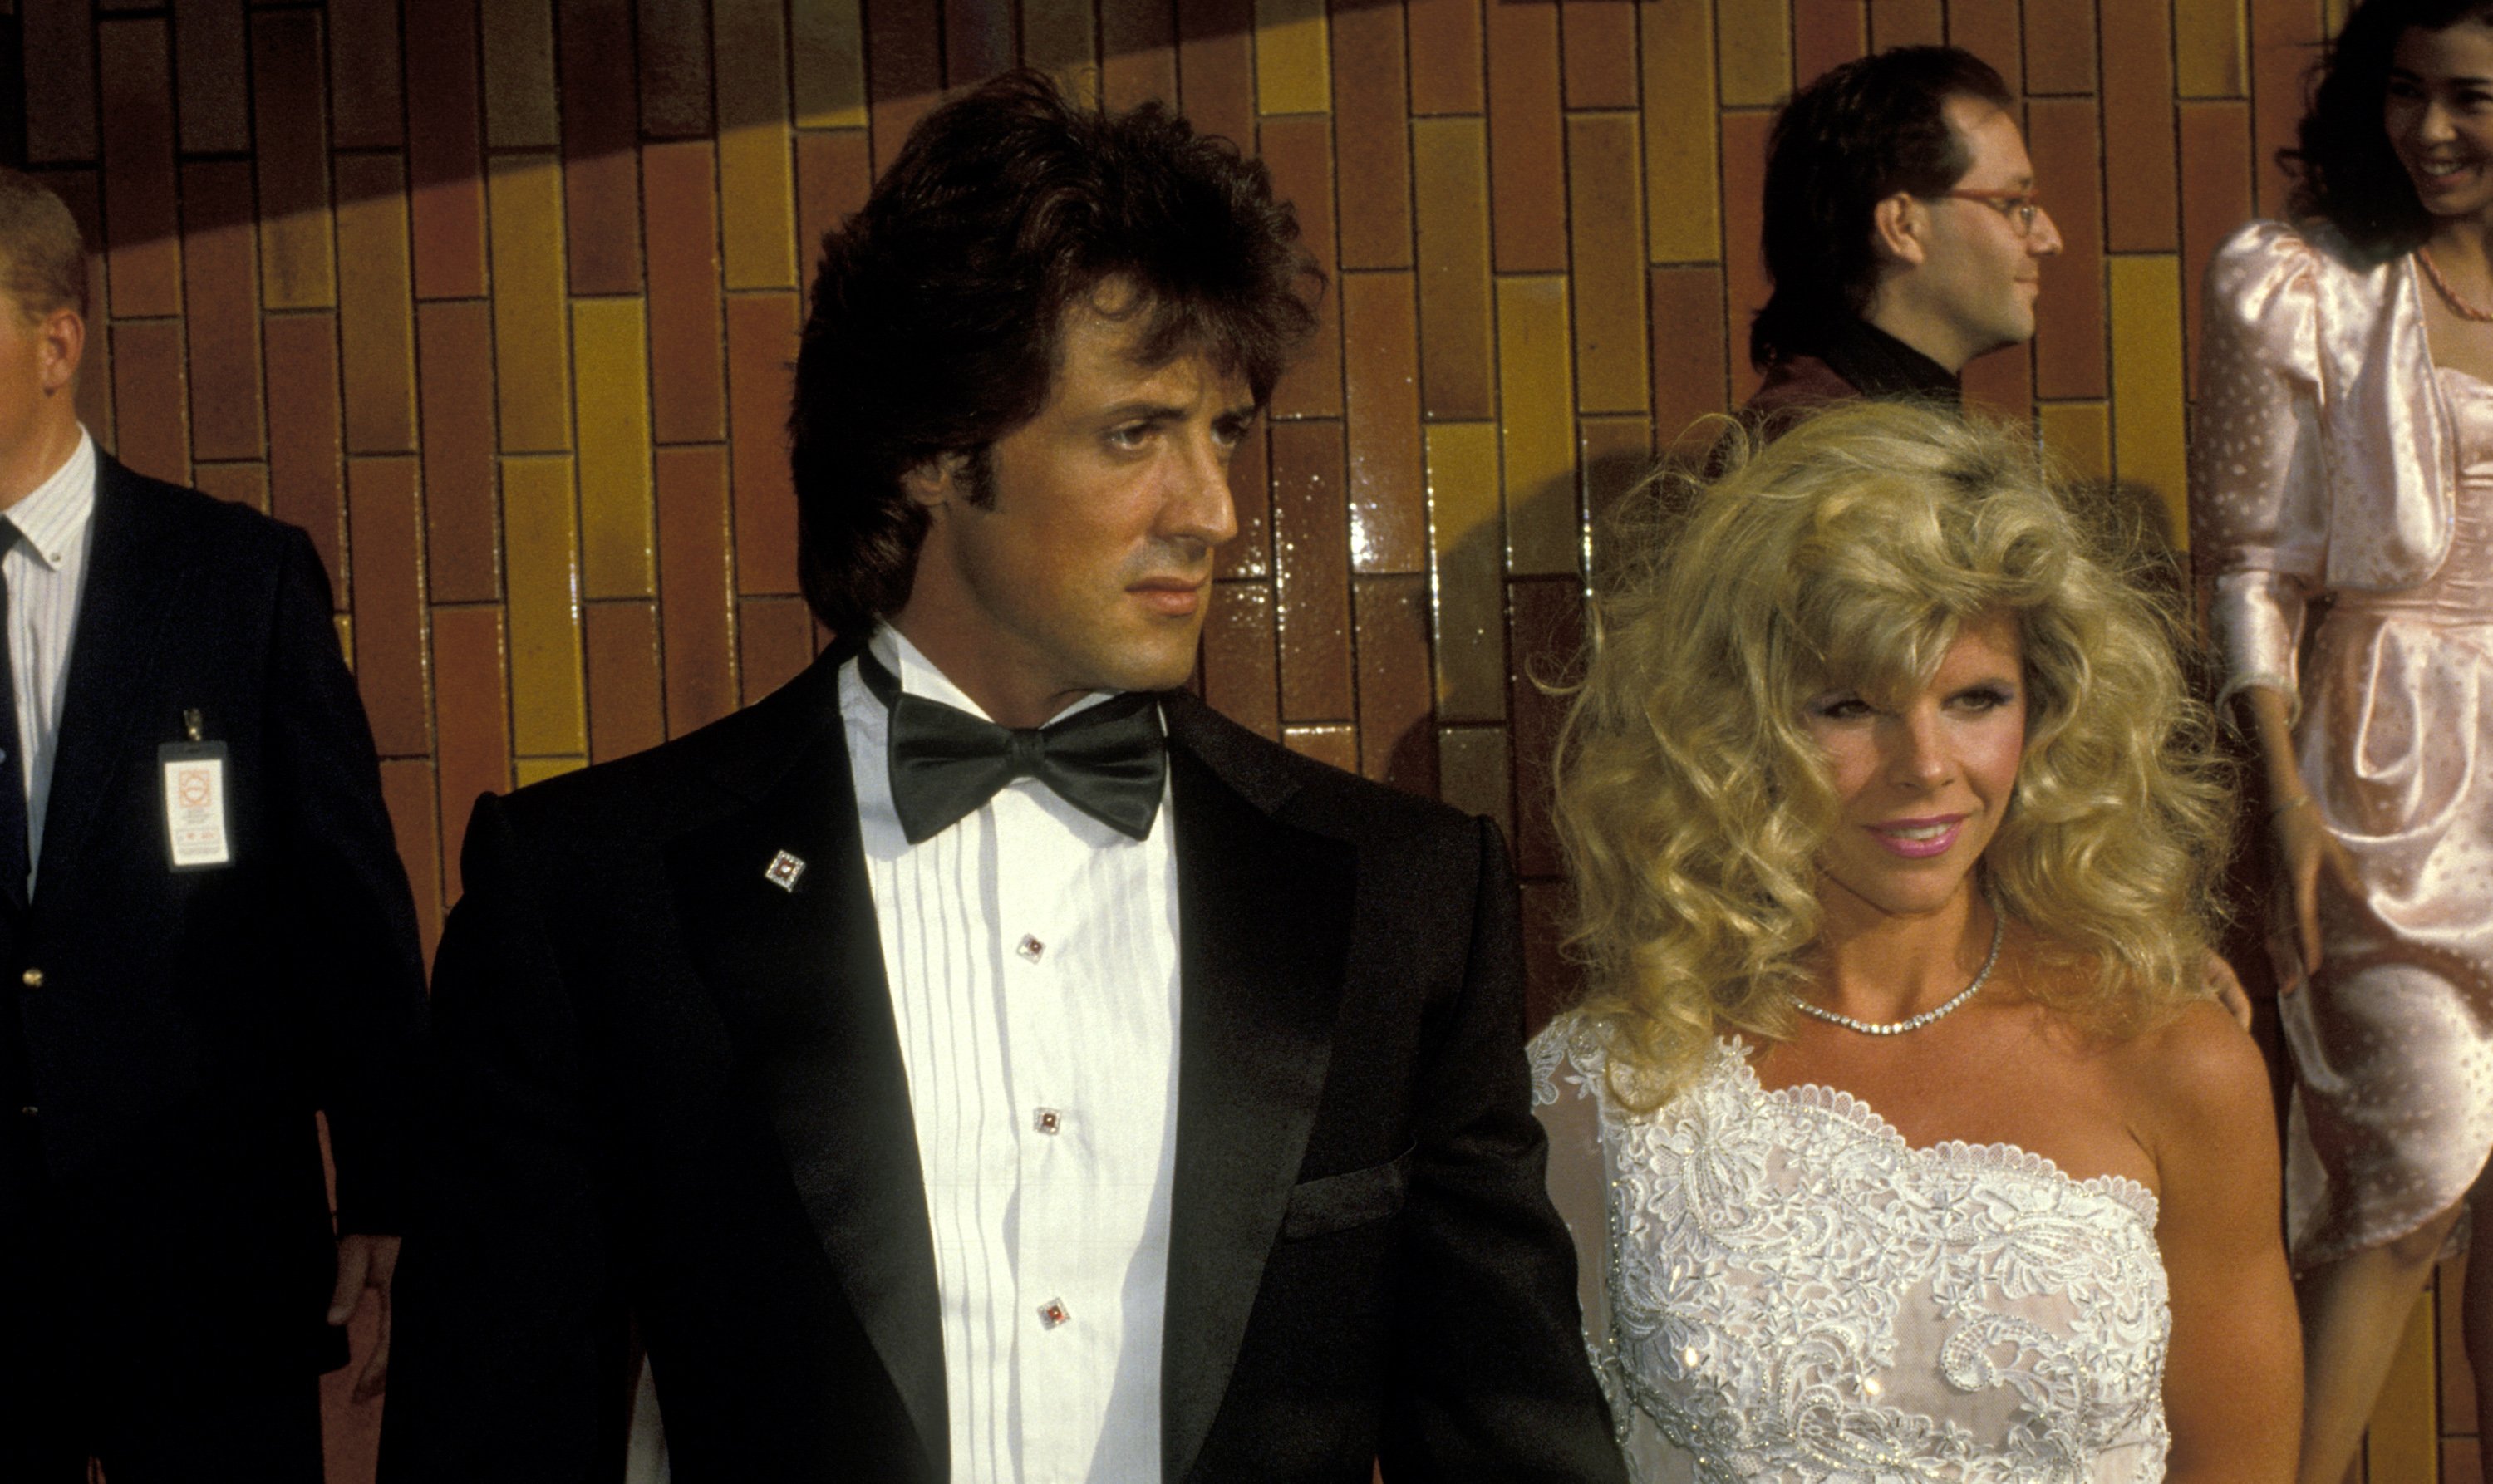 Sylvester Stallone and Sasha Czack Stallone during the "Rhinestone" Los Angeles premiere in New York City, New York, on June 20, 1984. | Source: Getty Images